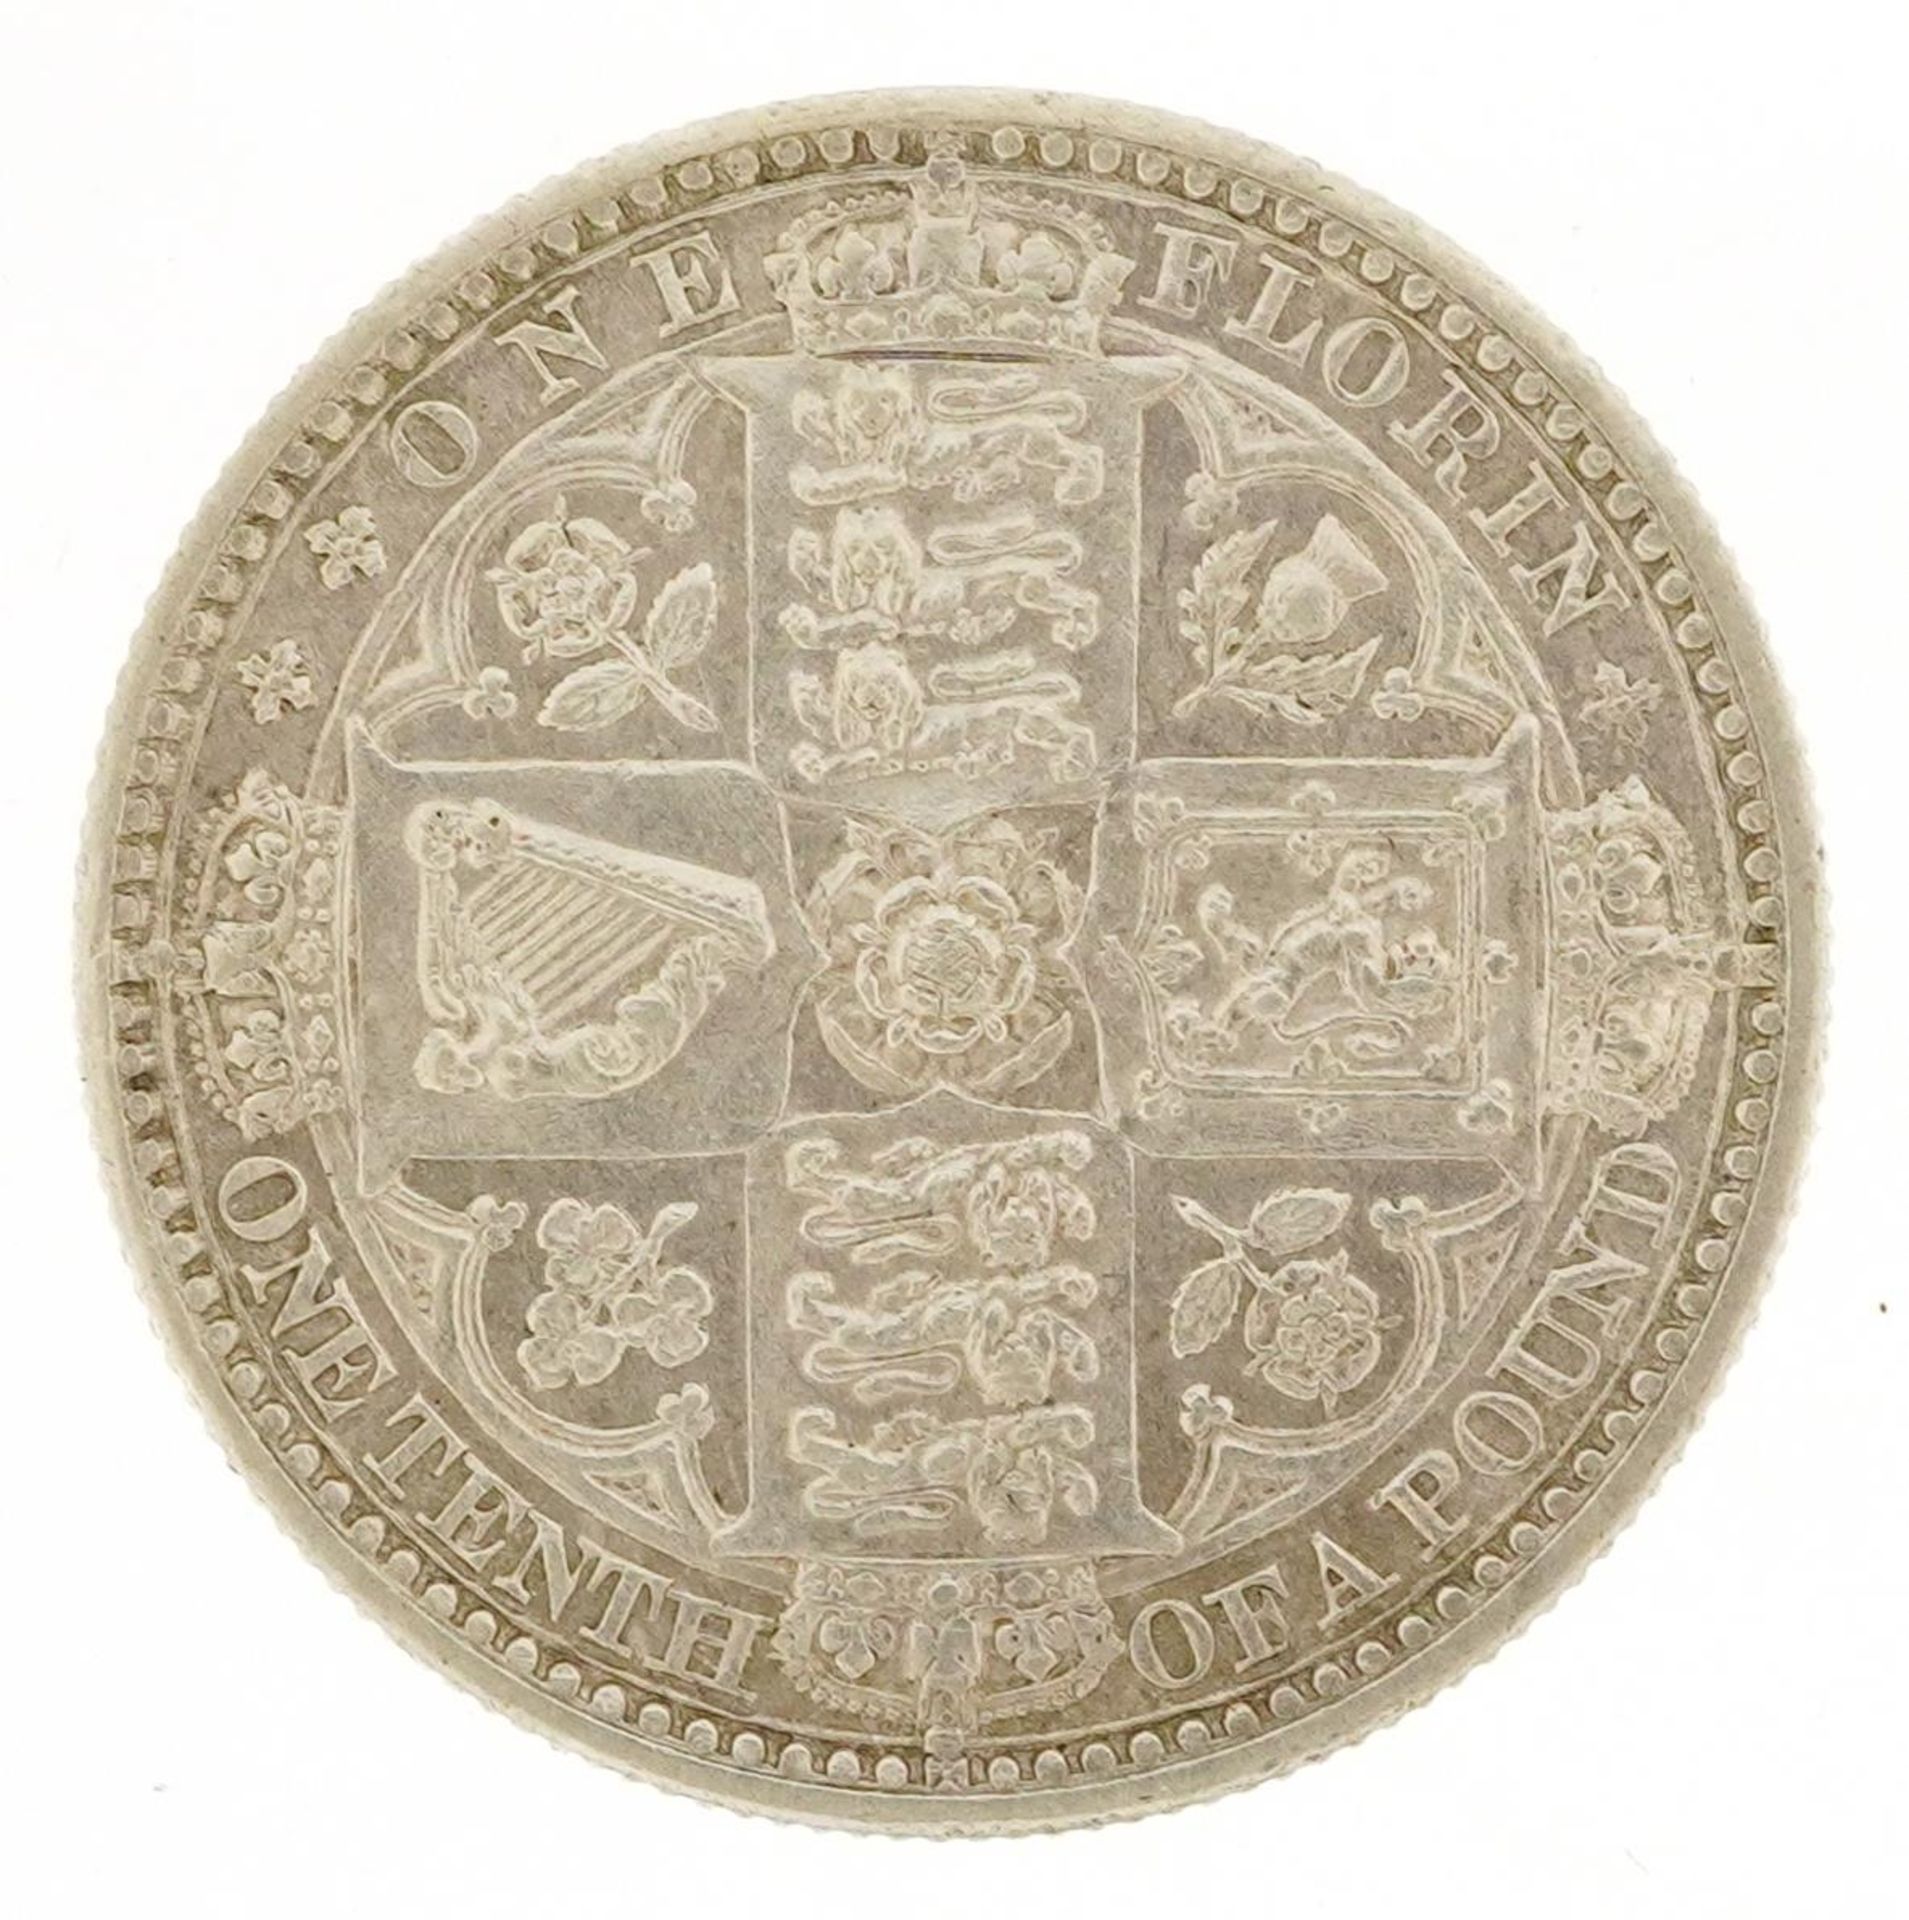 Victorian 1849 Godless florin : For further information on this lot please visit Eastbourneauction.